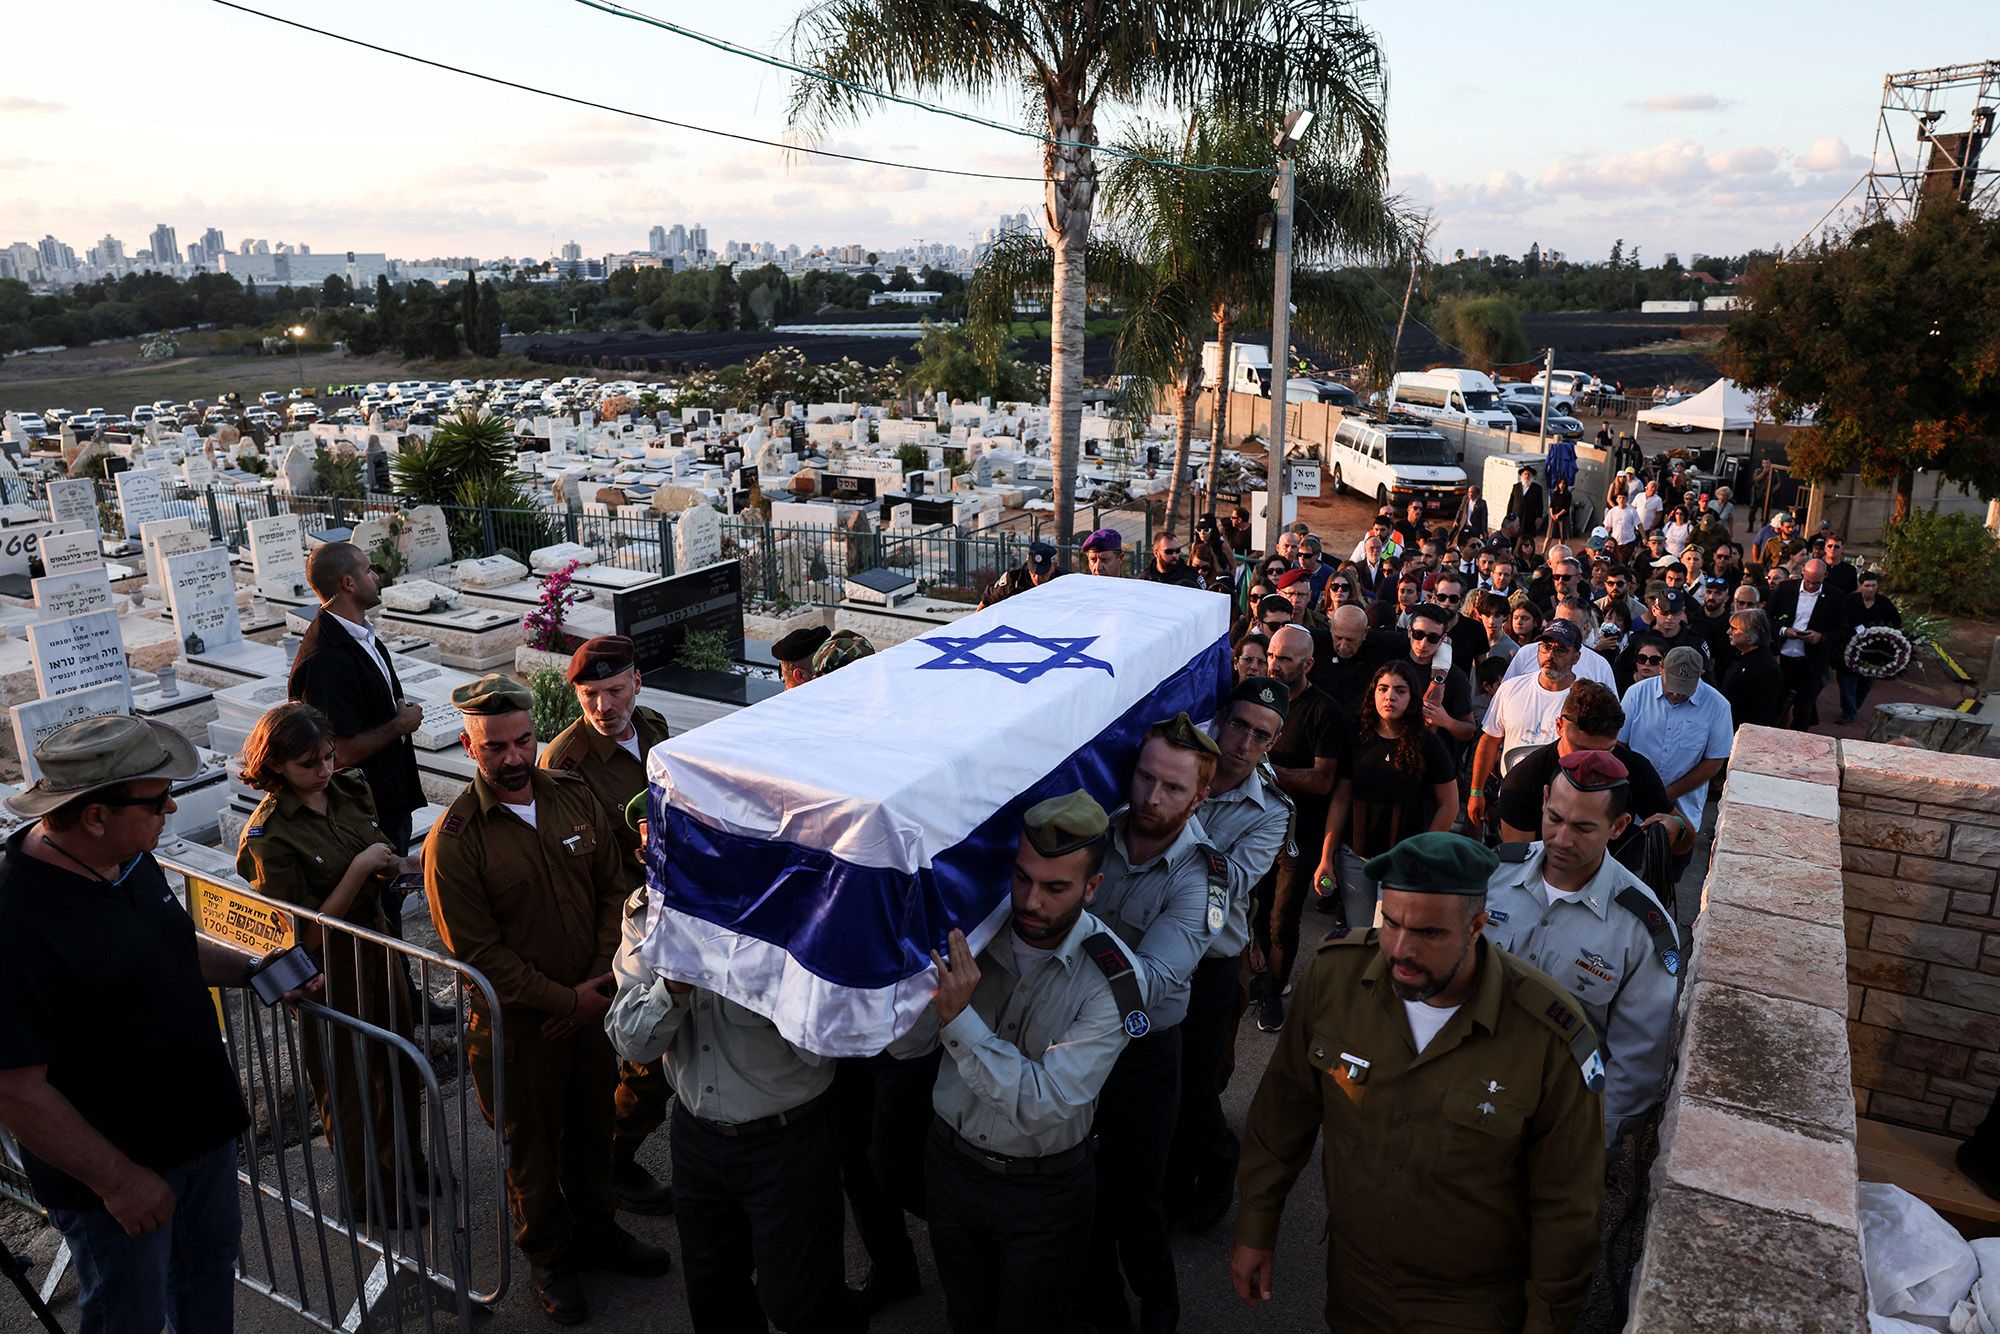 Friends and relatives of Ofir Libstein, who served as head of the Sha'ar HaNegev Regional Council and died during the Kibbutz Kfar Aza attack, mourn at his funeral in Even Yehuda, Israel, on Wednesday, October 18.